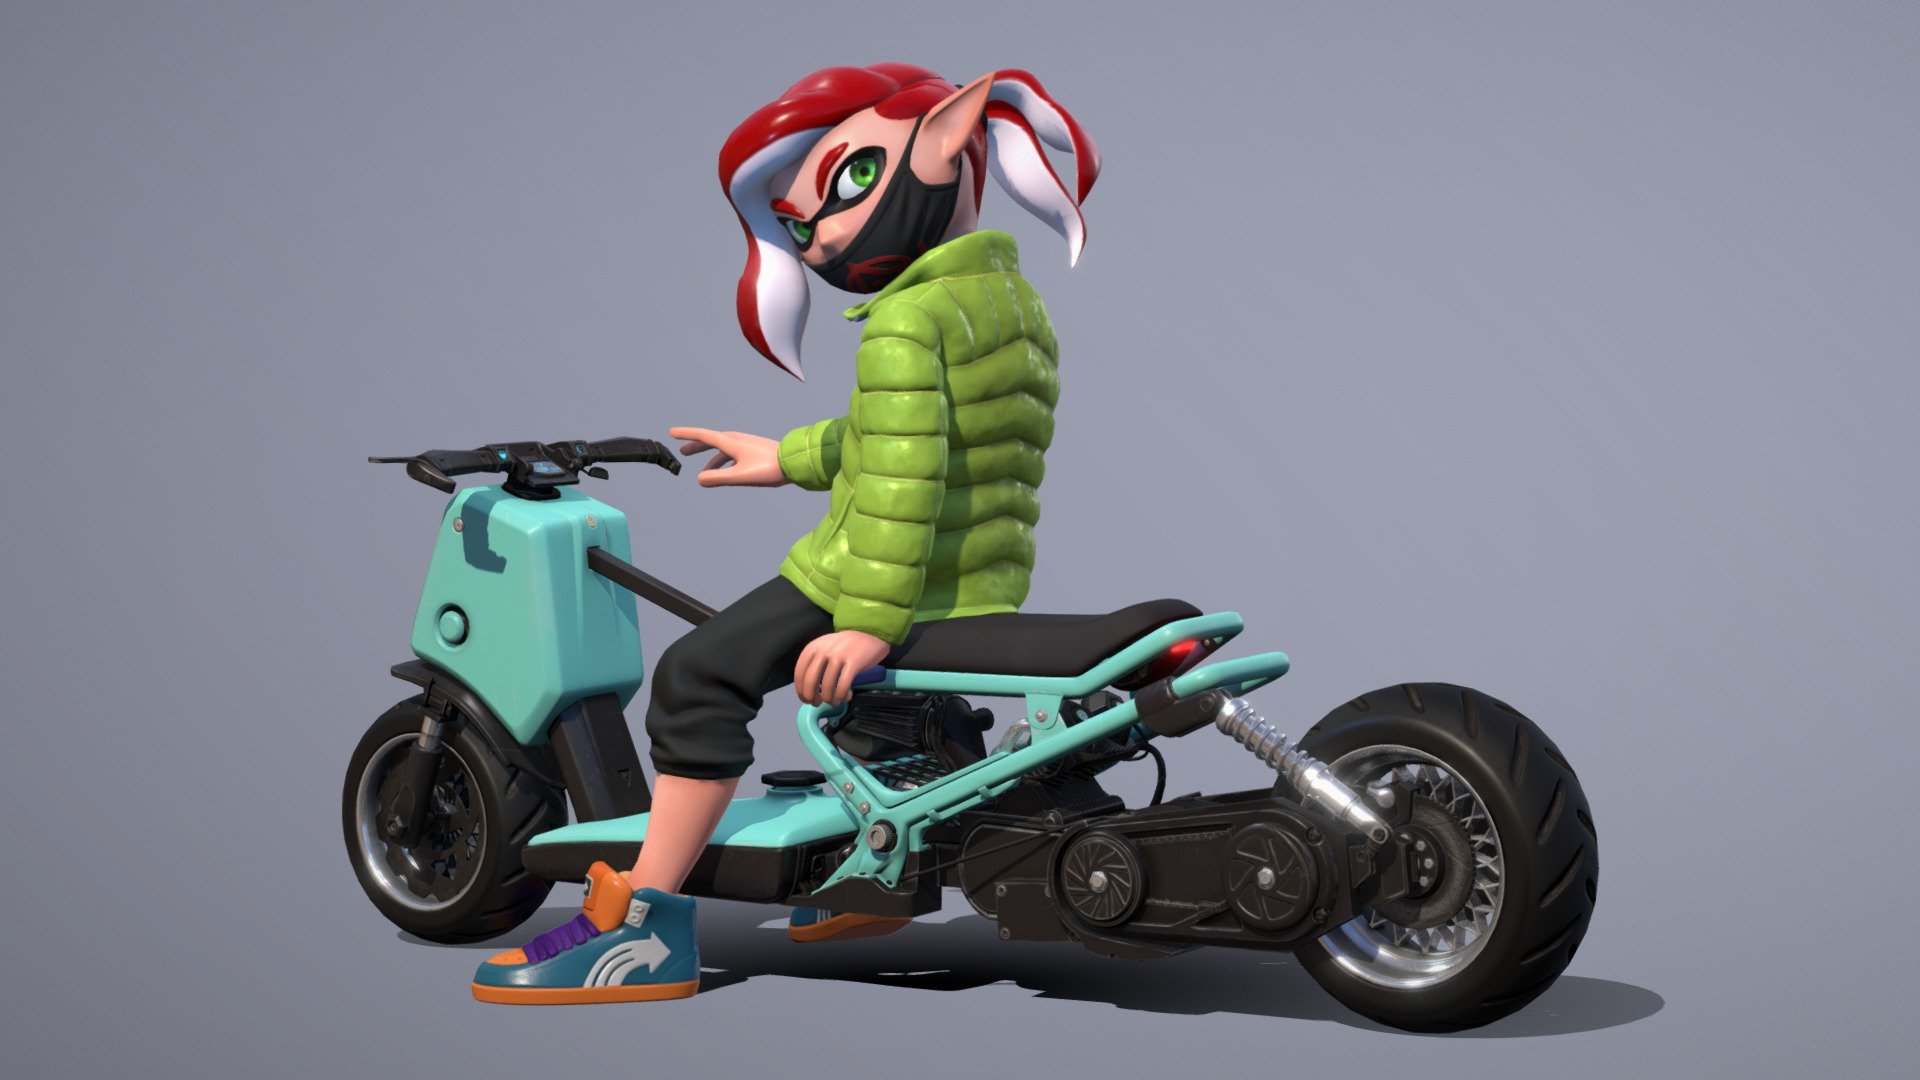 Modeled after an artwork of Skiorh

Bike and Inkling use 3 sets of 4k textures, although still look good when downscaled to 2k

Sprays use 512 textures for albedo and normals and 256 for the rest

Couldn't really match the background due to sketchfab limitations - Splatoon Biker - 3D model by Ouroboroth 3d model